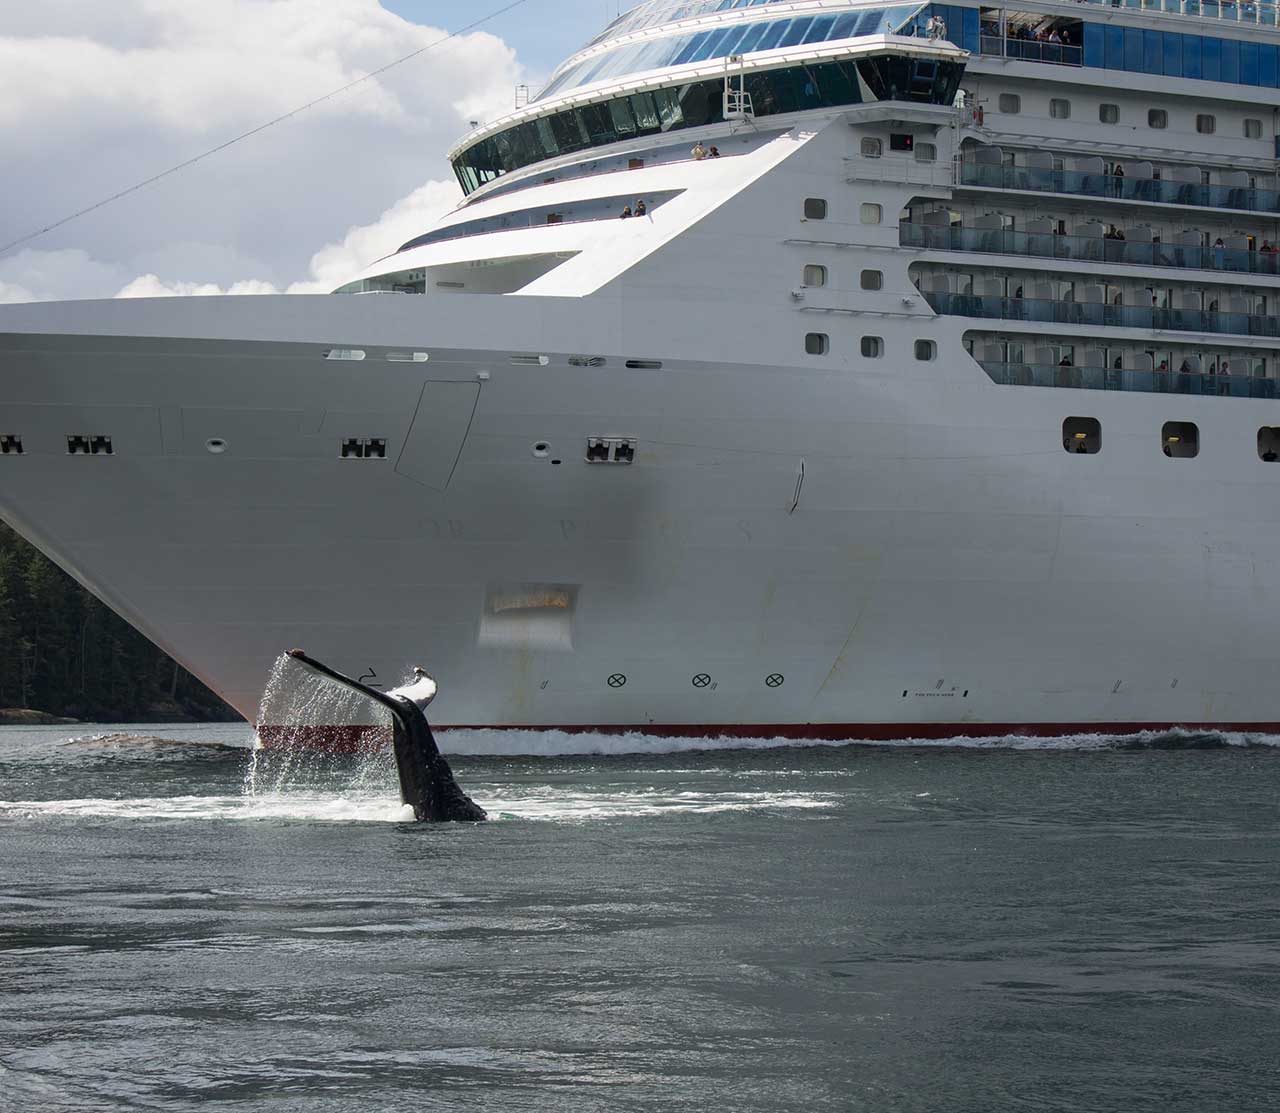 mers marine education research society whale tail above water near cruise ship